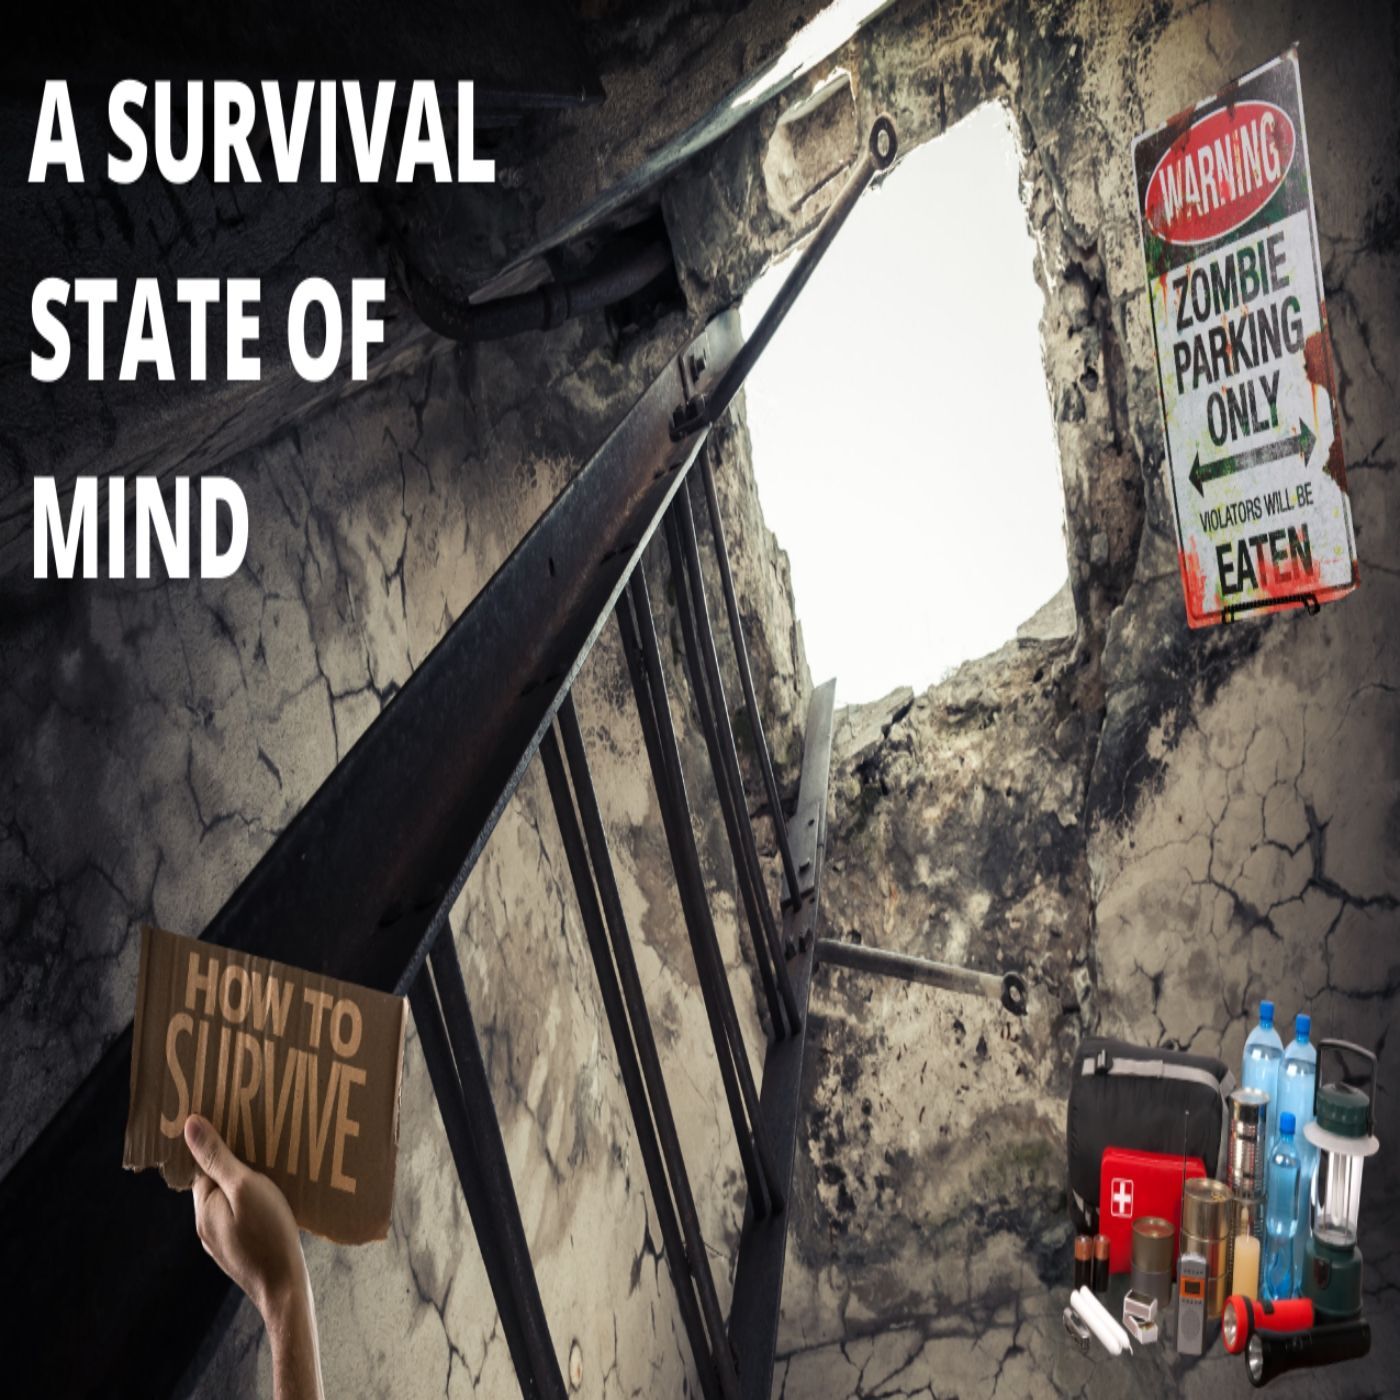 Ep. #397: A Survival State of Mind w/ James F. Ponder